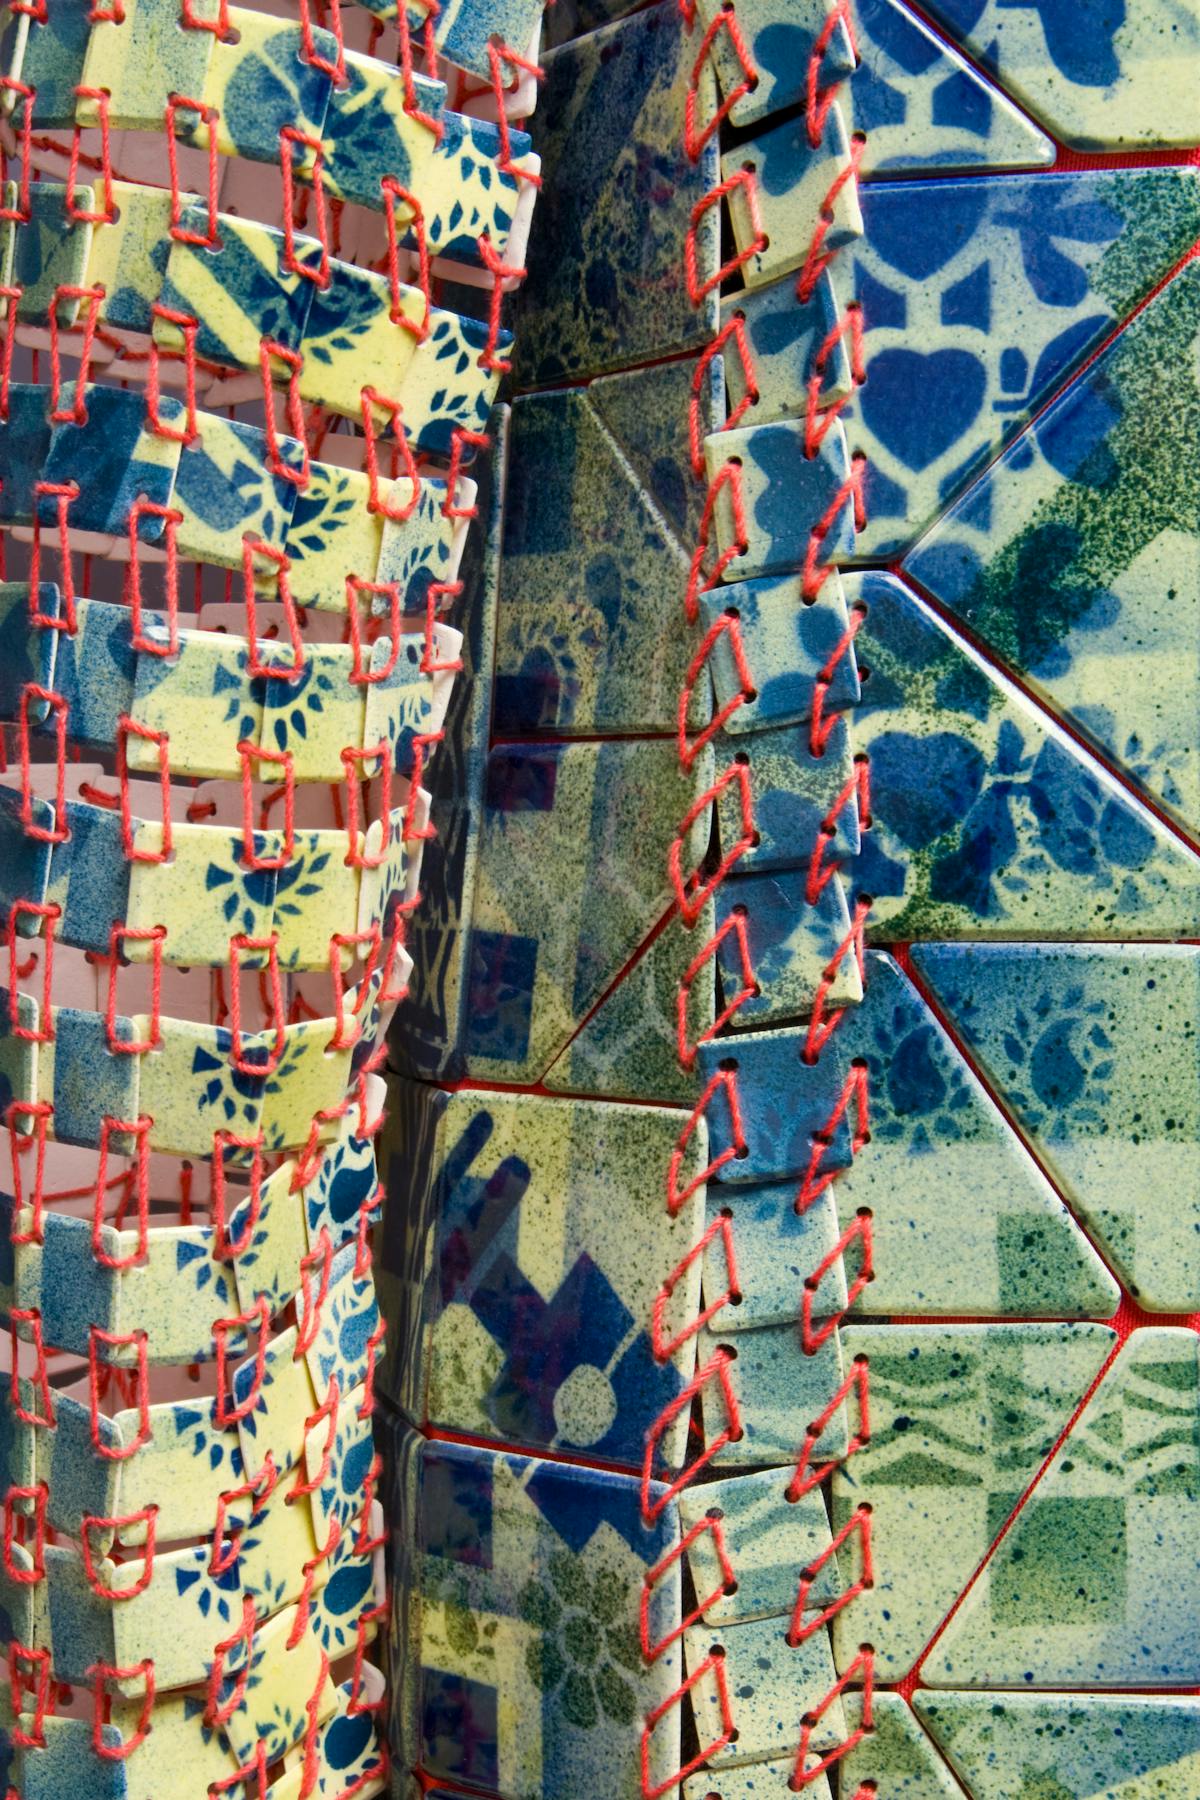 detail of overcoat made from green ceramic tiles sewn together with red thread